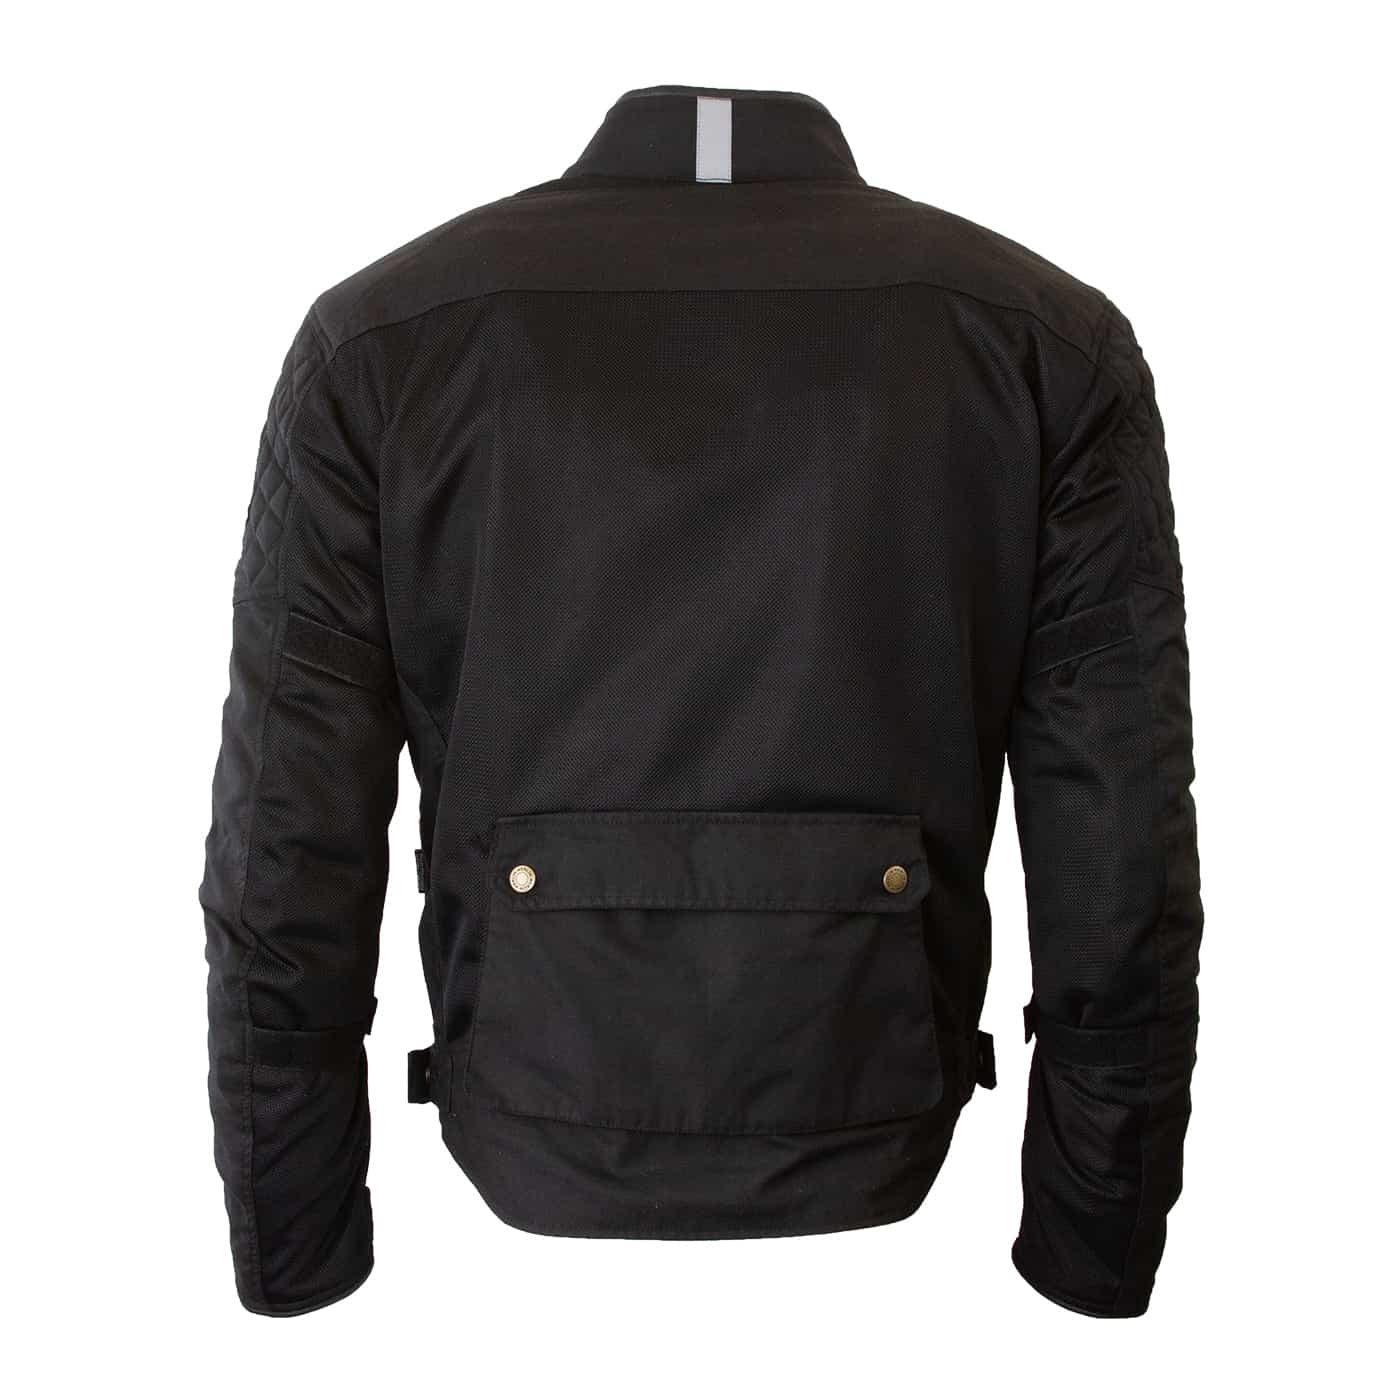 White background image of the back of Merlin Chigwell Utility waxed cotton jacket in black